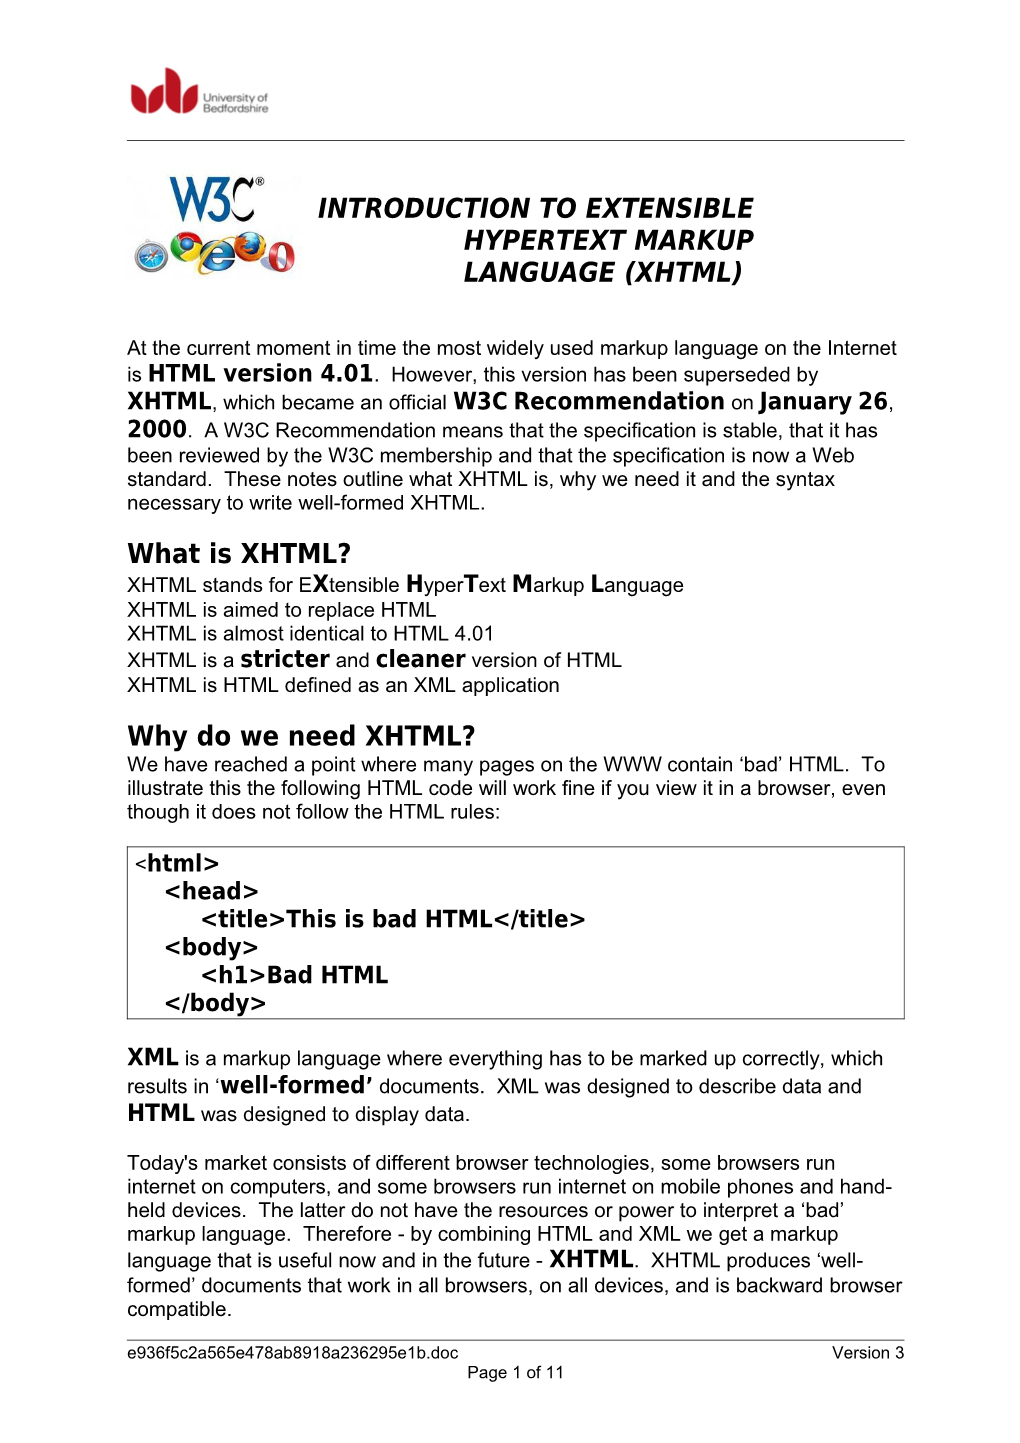 Introduction to Extensible Hypertext Markup Language (Xhtml)